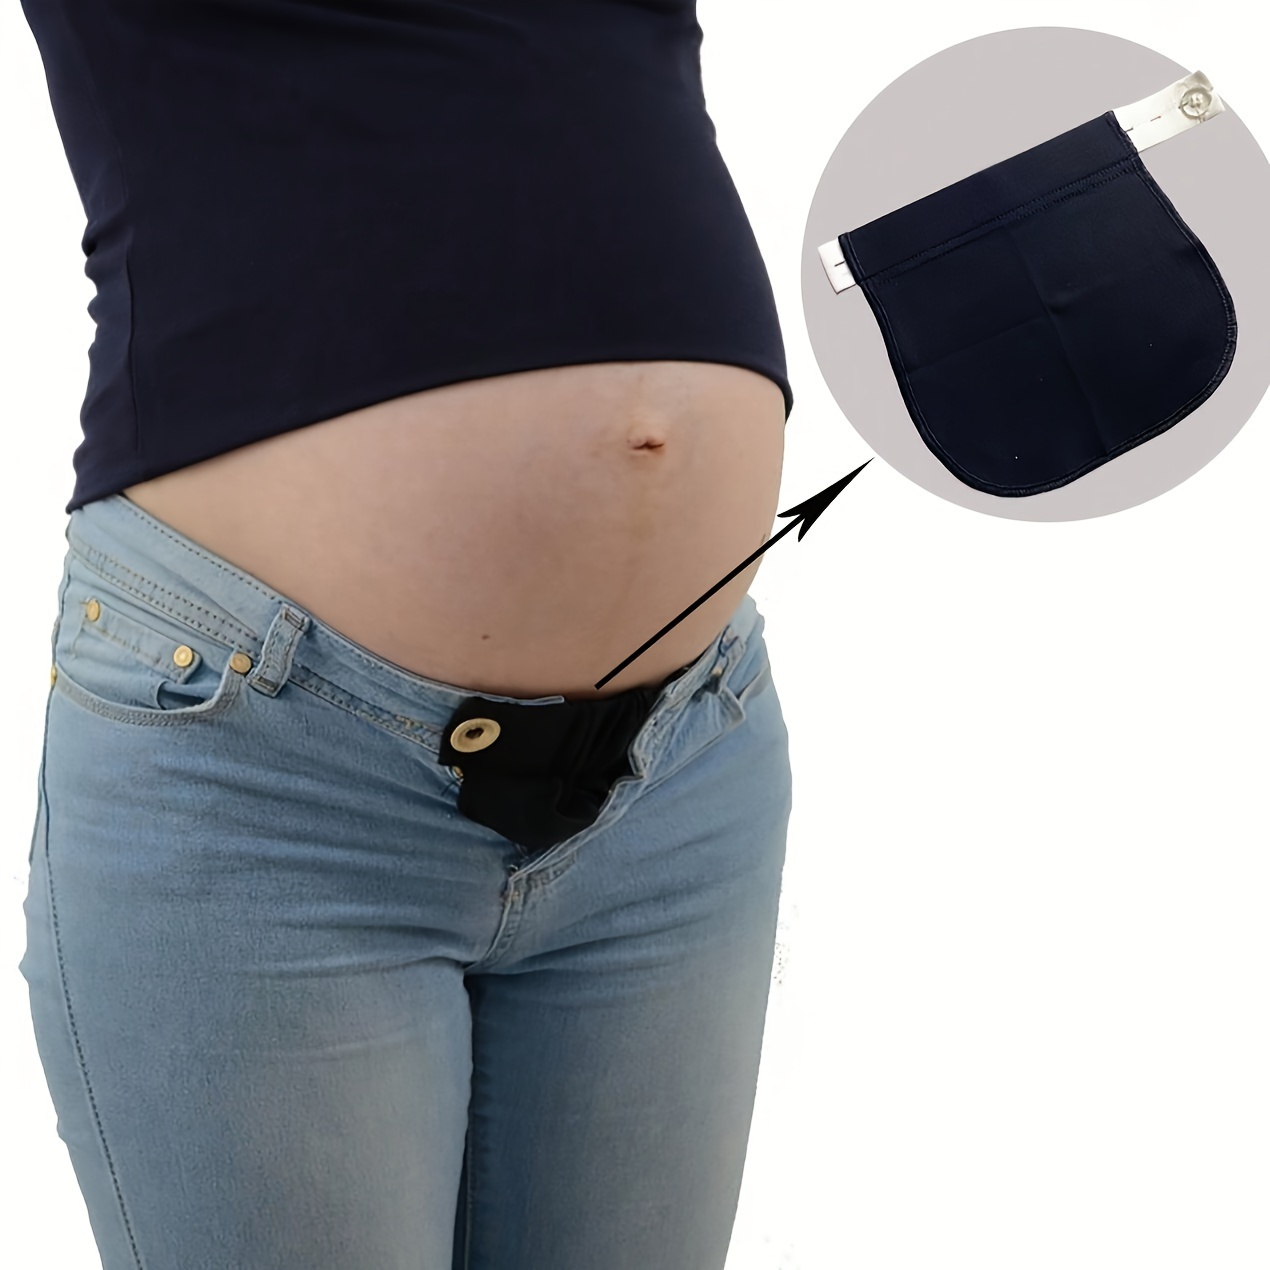 

Women's Maternity Elastic Waistband Extender - Comfortable Stretch Belt For Pregnancy Jeans, Casual Style